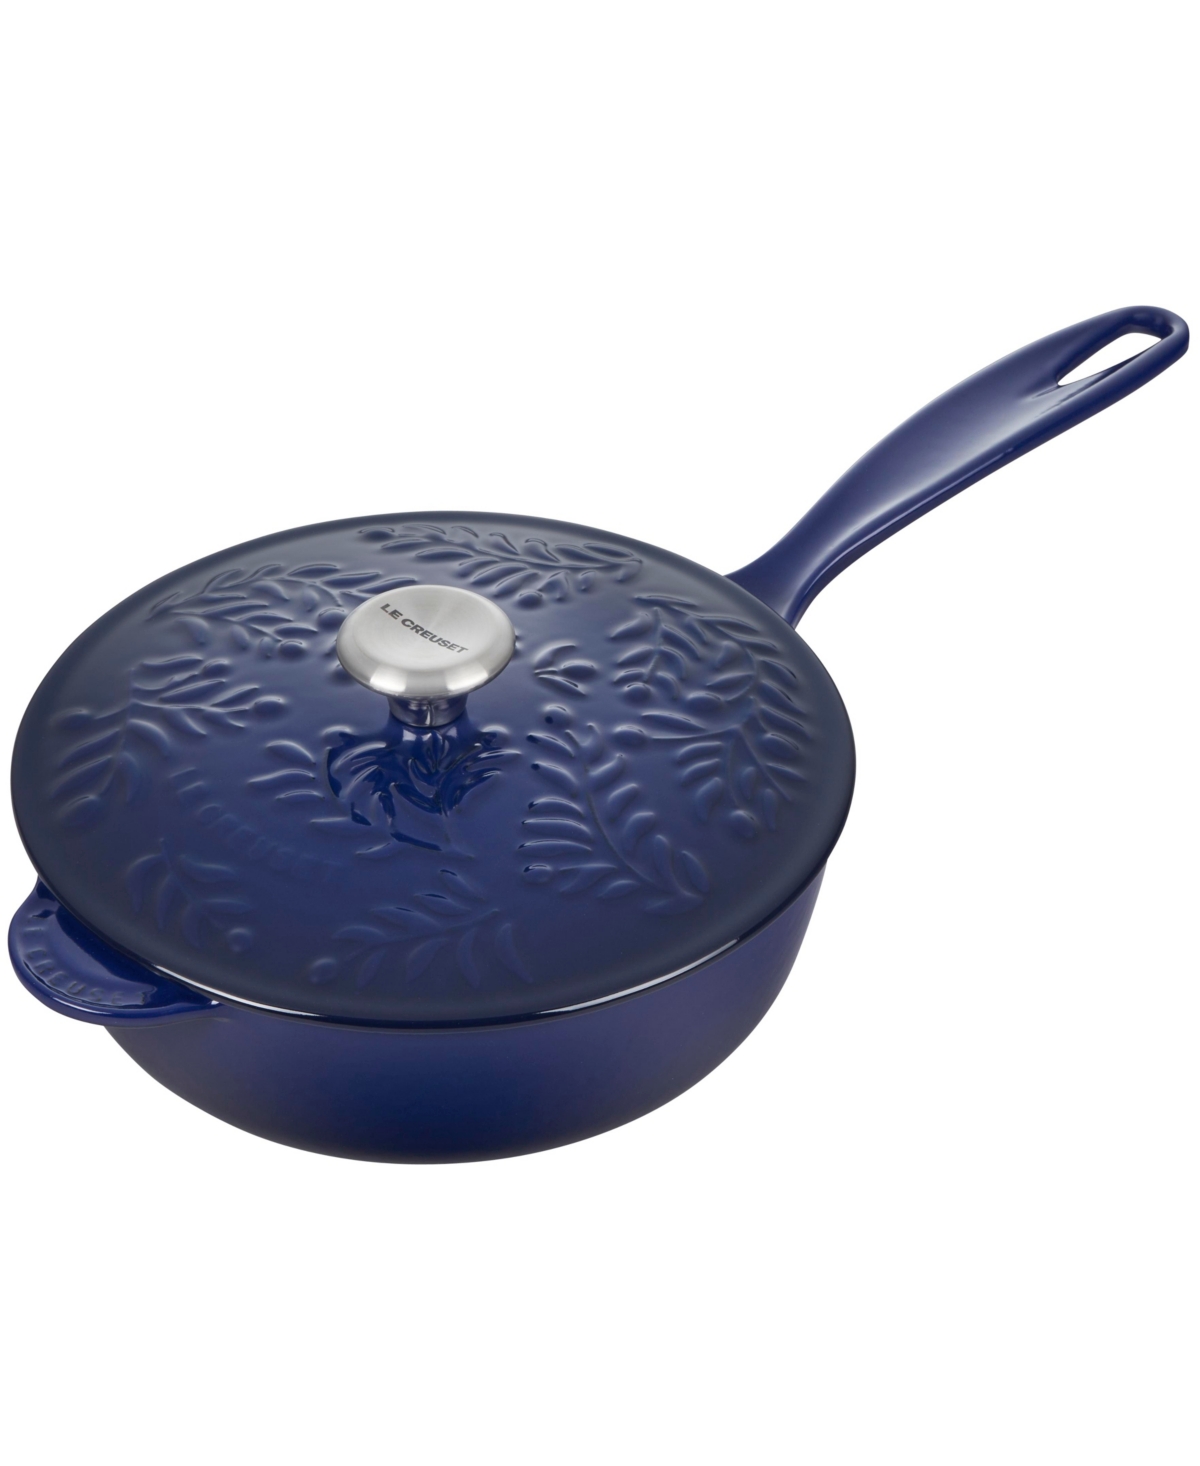 Le Creuset Cast Iron Saucier Pan With Embossed Olive Branch 2.25 Quart In Indigo